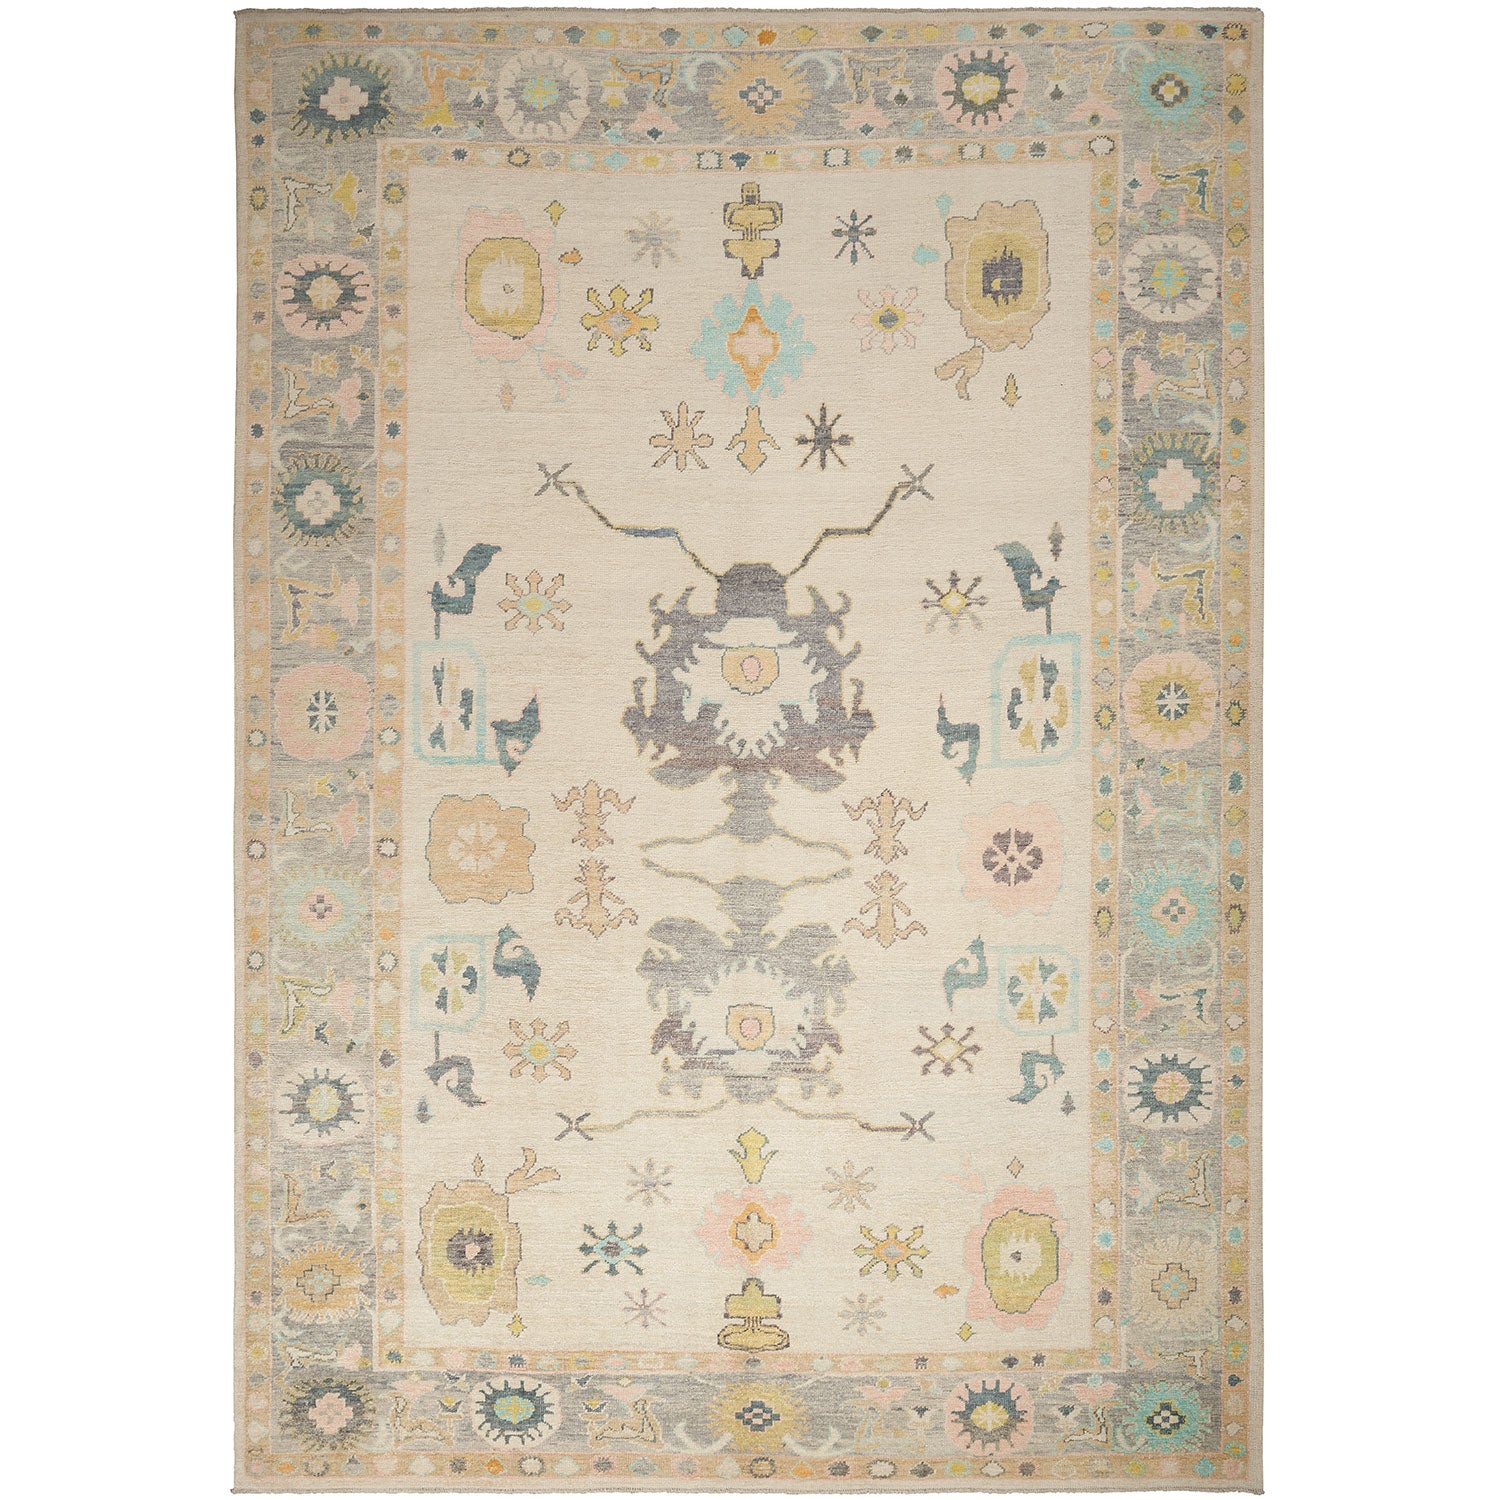 Vintage Persian-style rug with symmetrical floral motifs and muted colors.